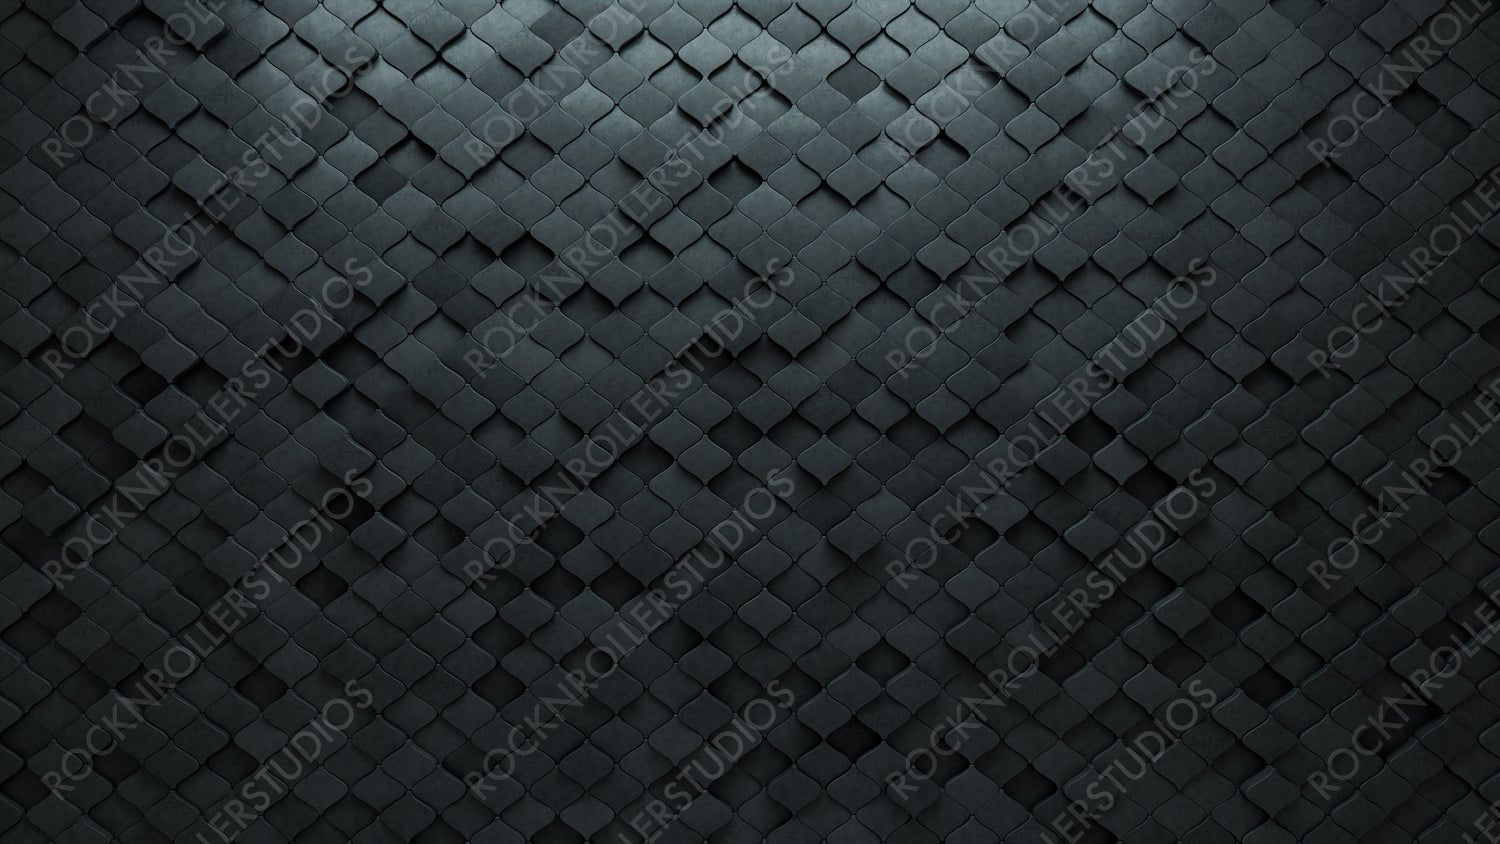 Arabesque, Semigloss Mosaic Tiles arranged in the shape of a wall. Concrete, Polished, Bricks stacked to create a 3D block background. 3D Render